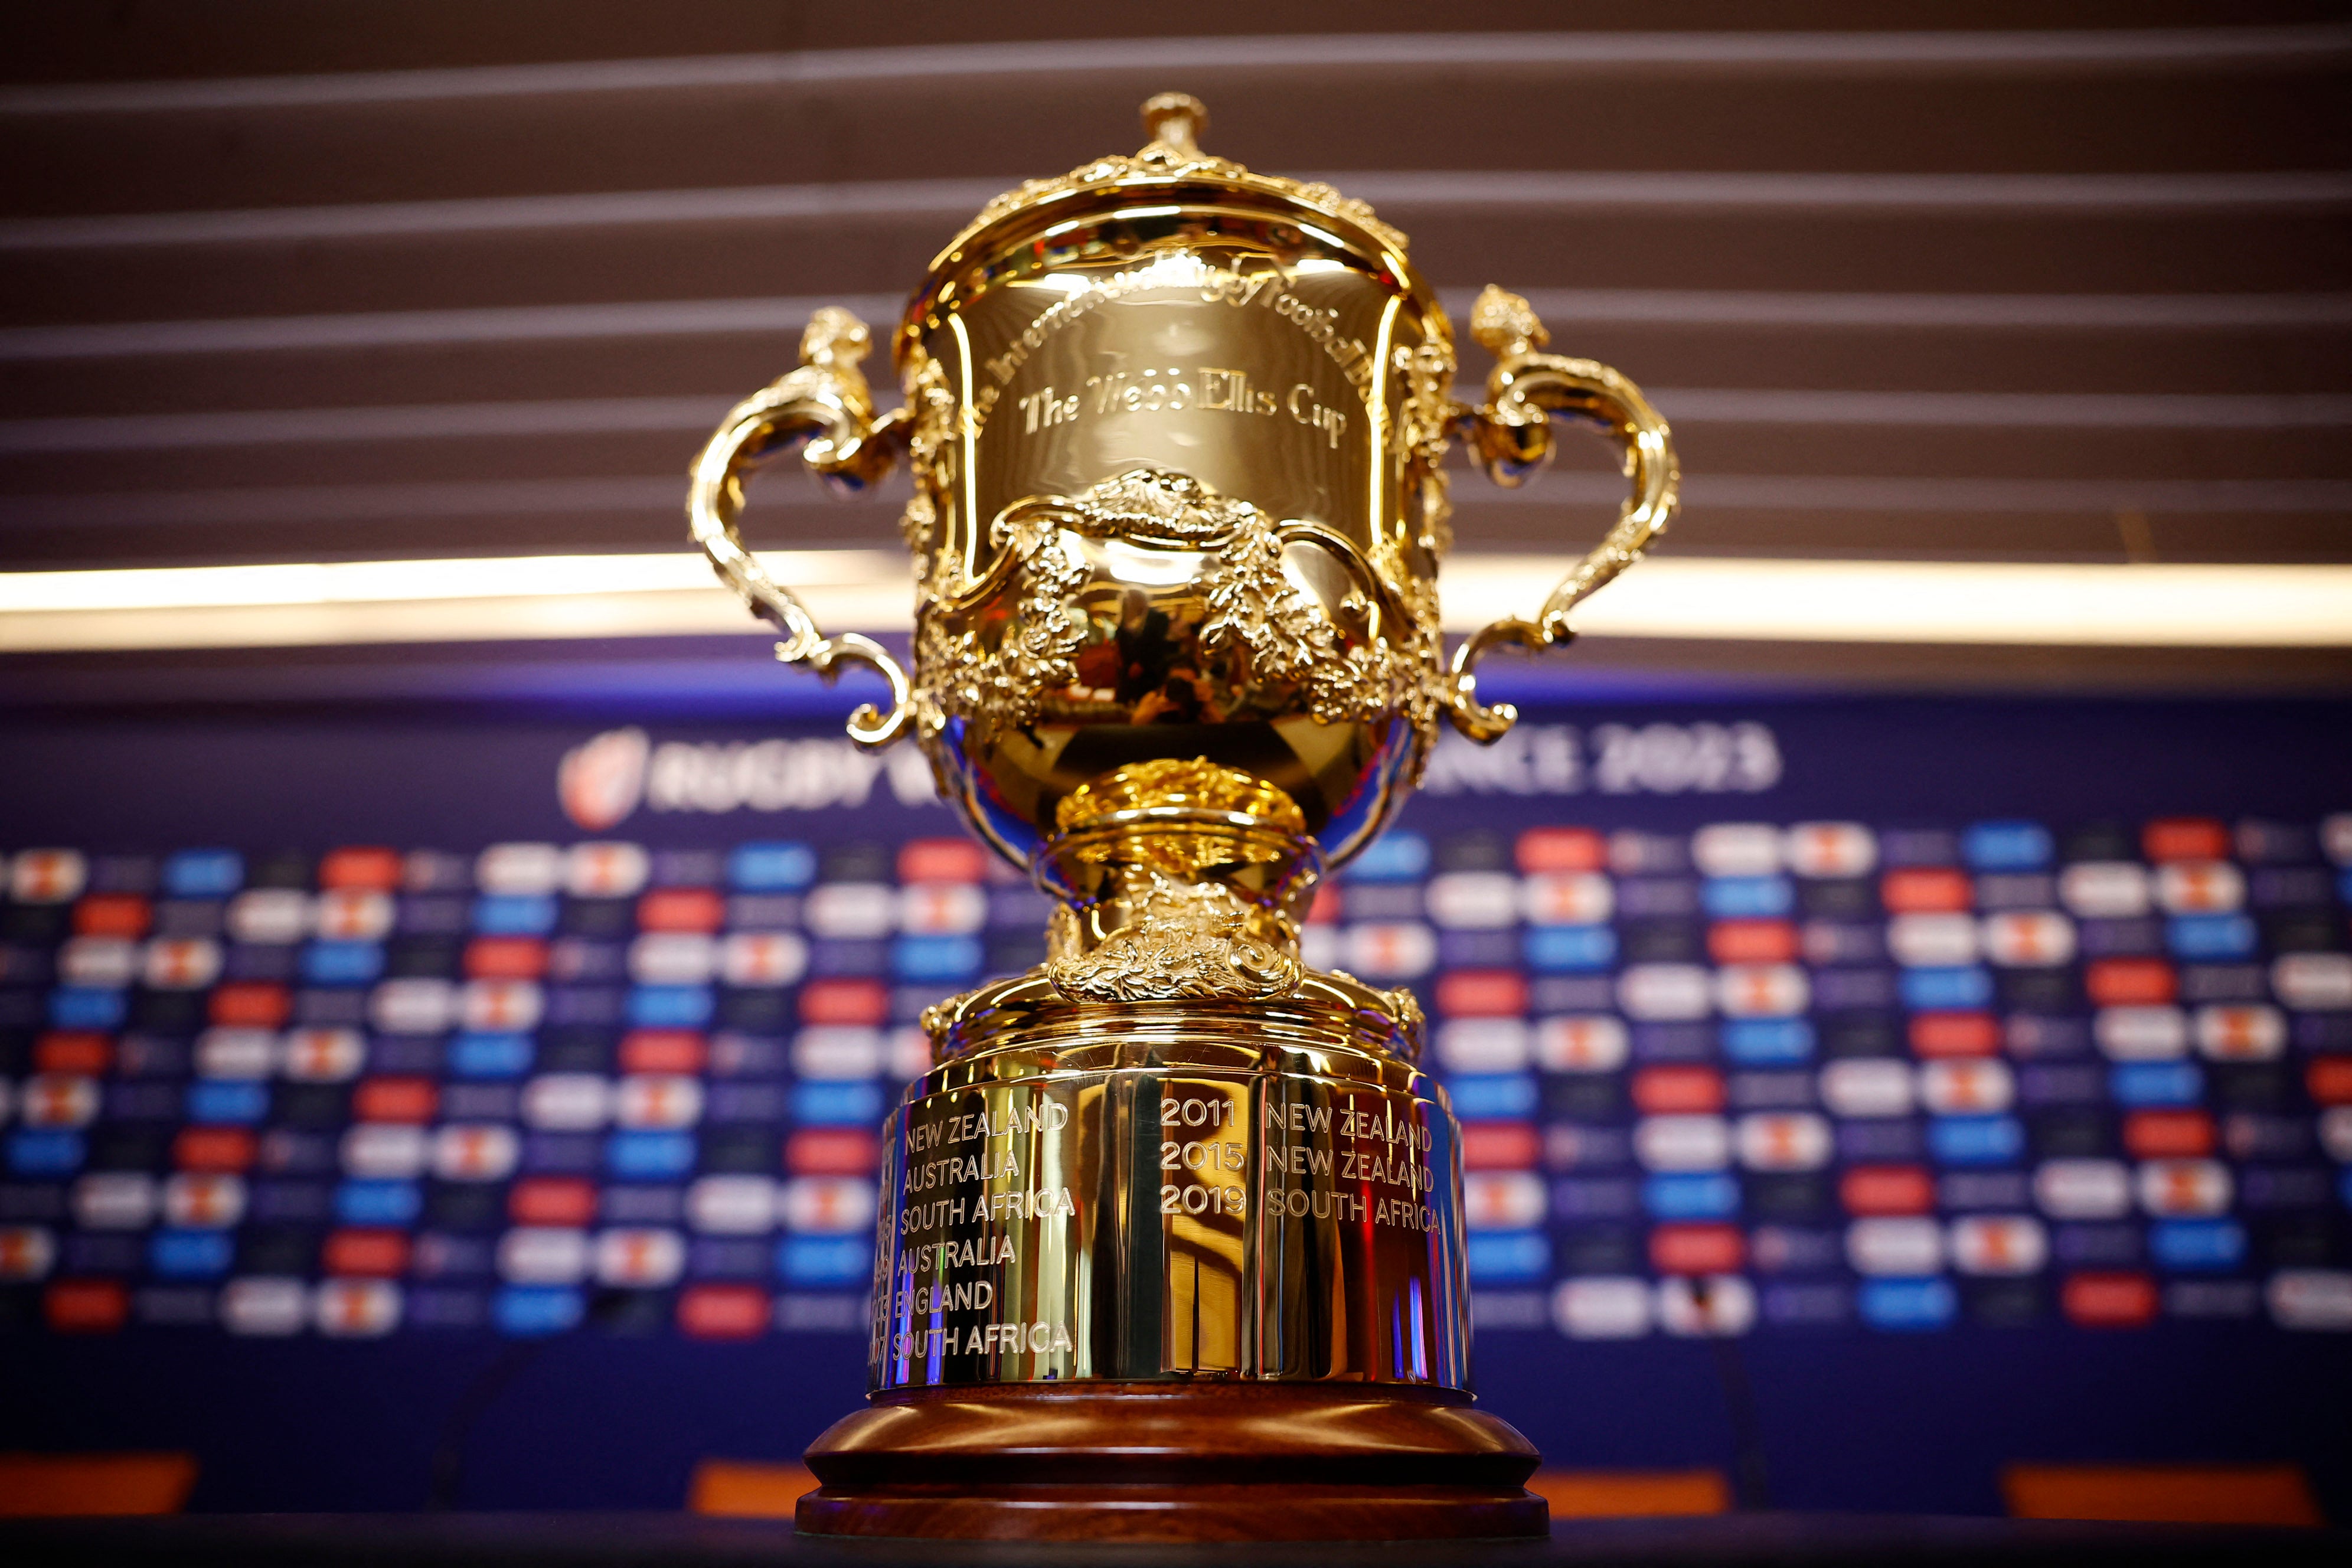 rugby world cup tv coverage